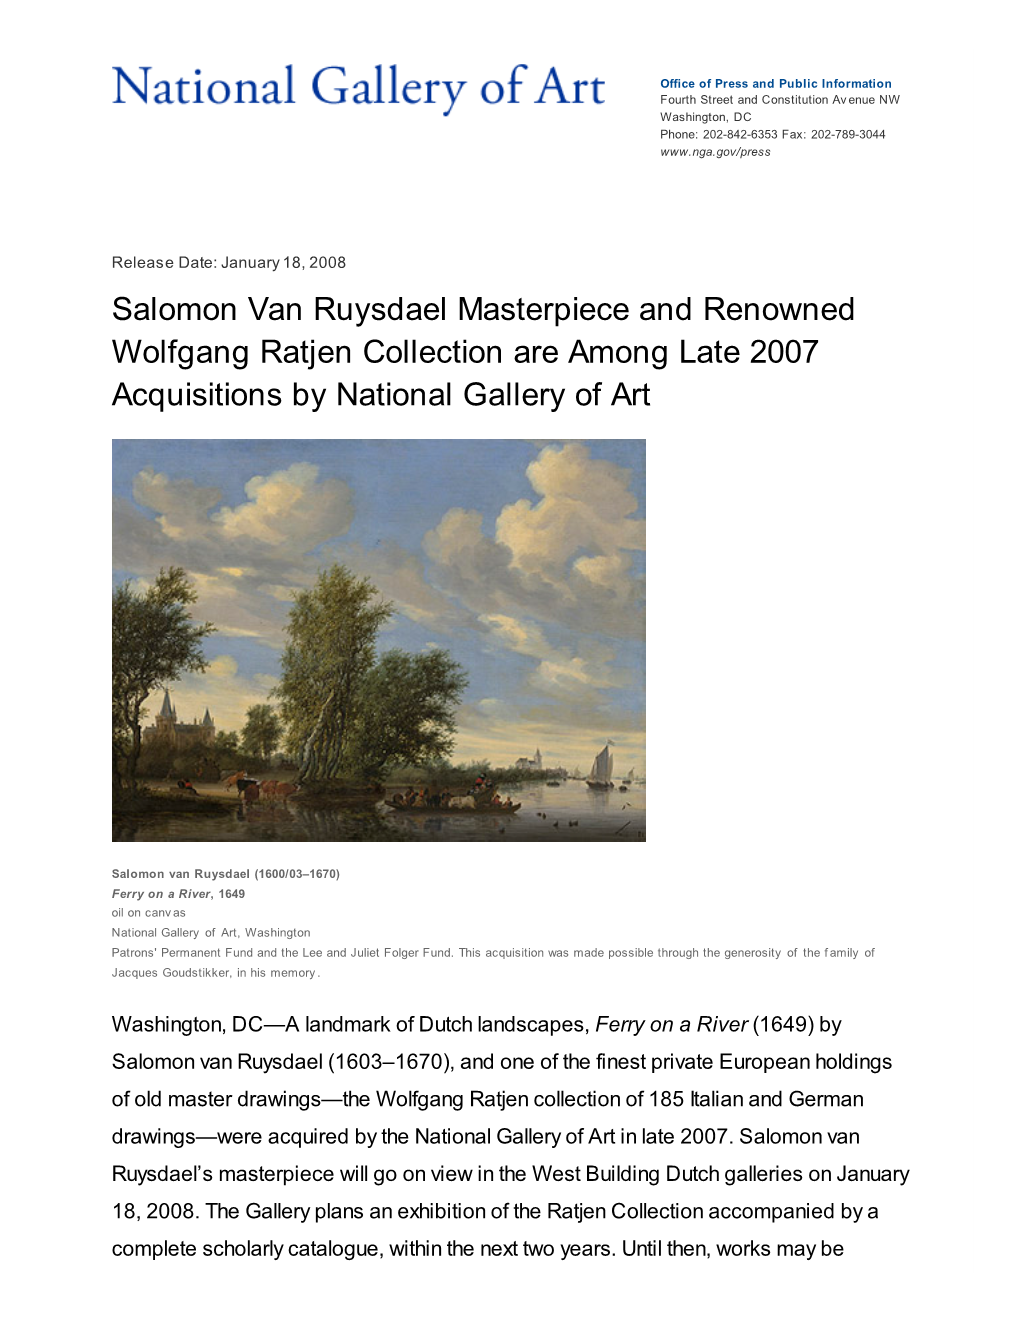 Salomon Van Ruysdael Masterpiece and Renowned Wolfgang Ratjen Collection Are Among Late 2007 Acquisitions by National Gallery of Art